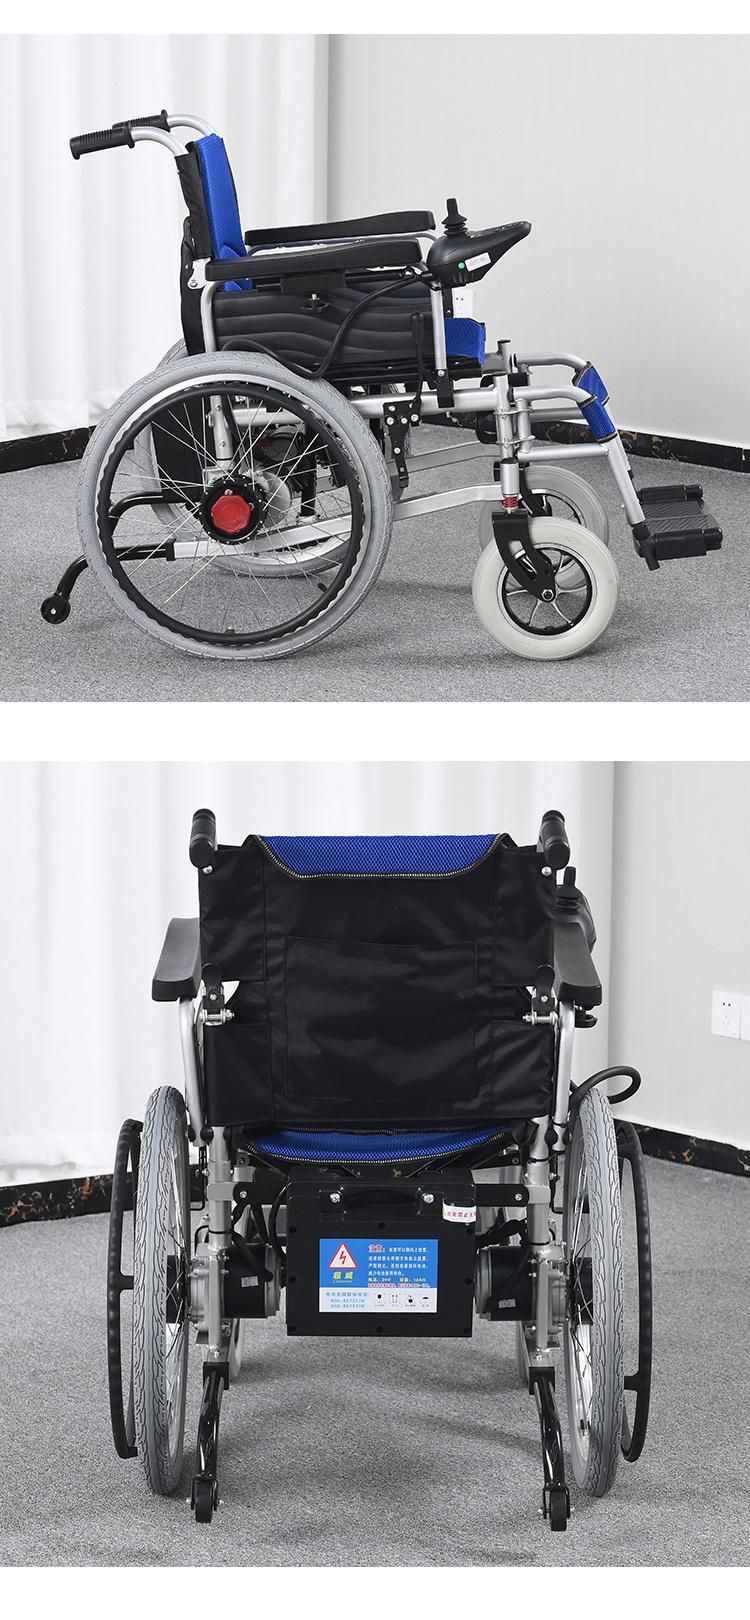 Electronic Adult Wheelchair Disability Electric Wheelchair